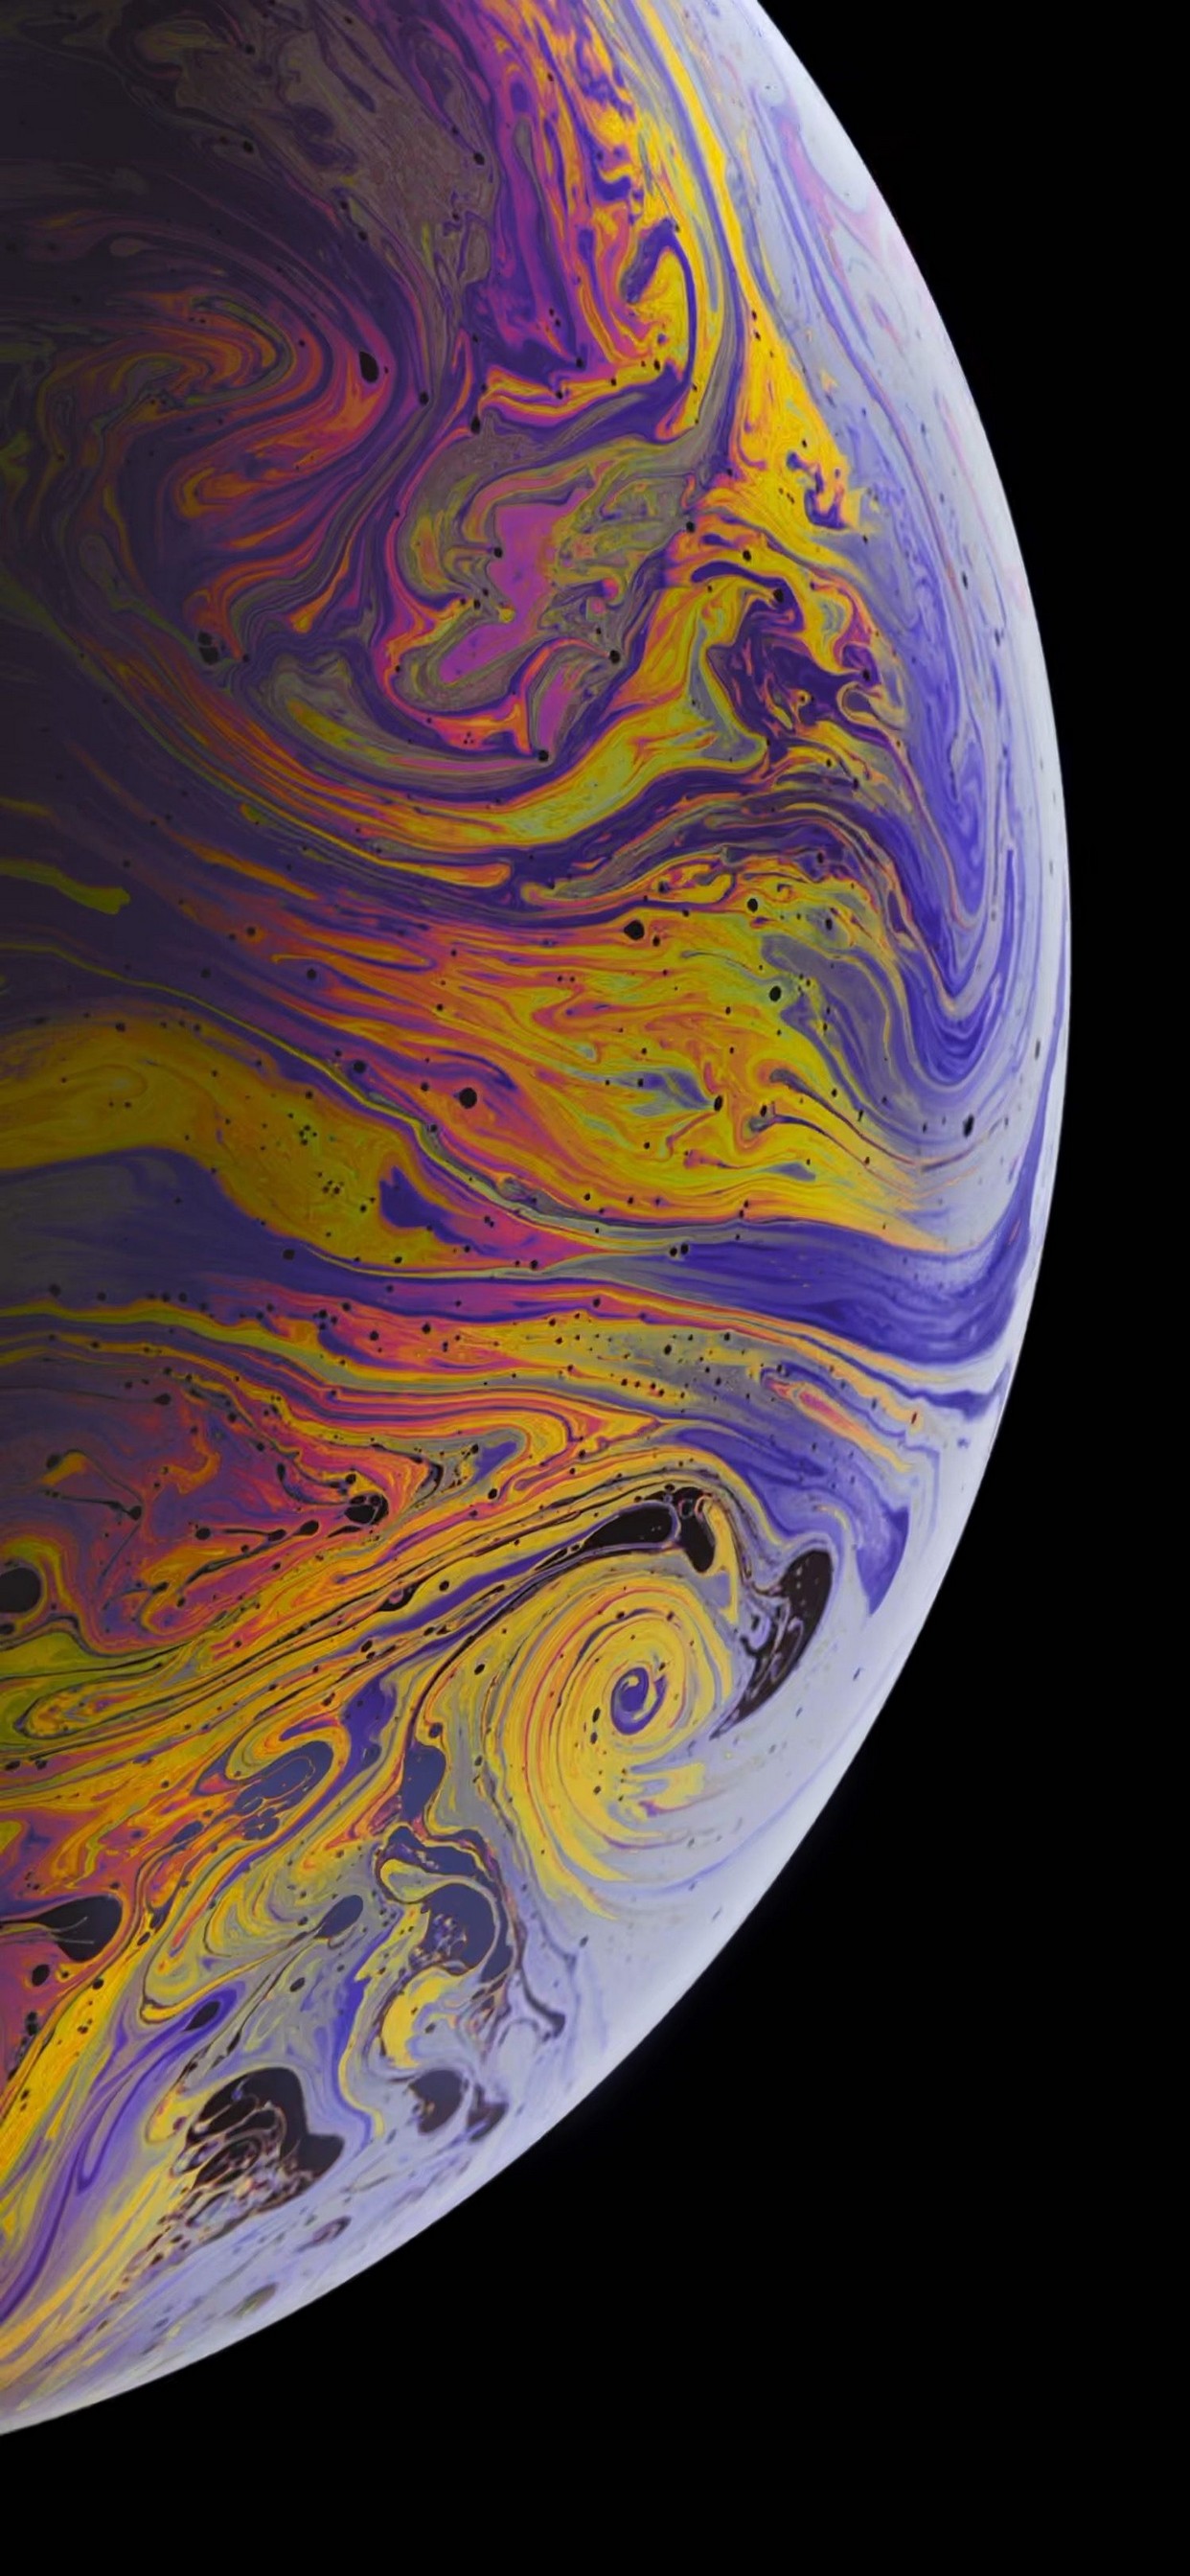 Iphone Xs Max Wallpaper In Hd With High-resolution - Iphone Xs Max - HD Wallpaper 